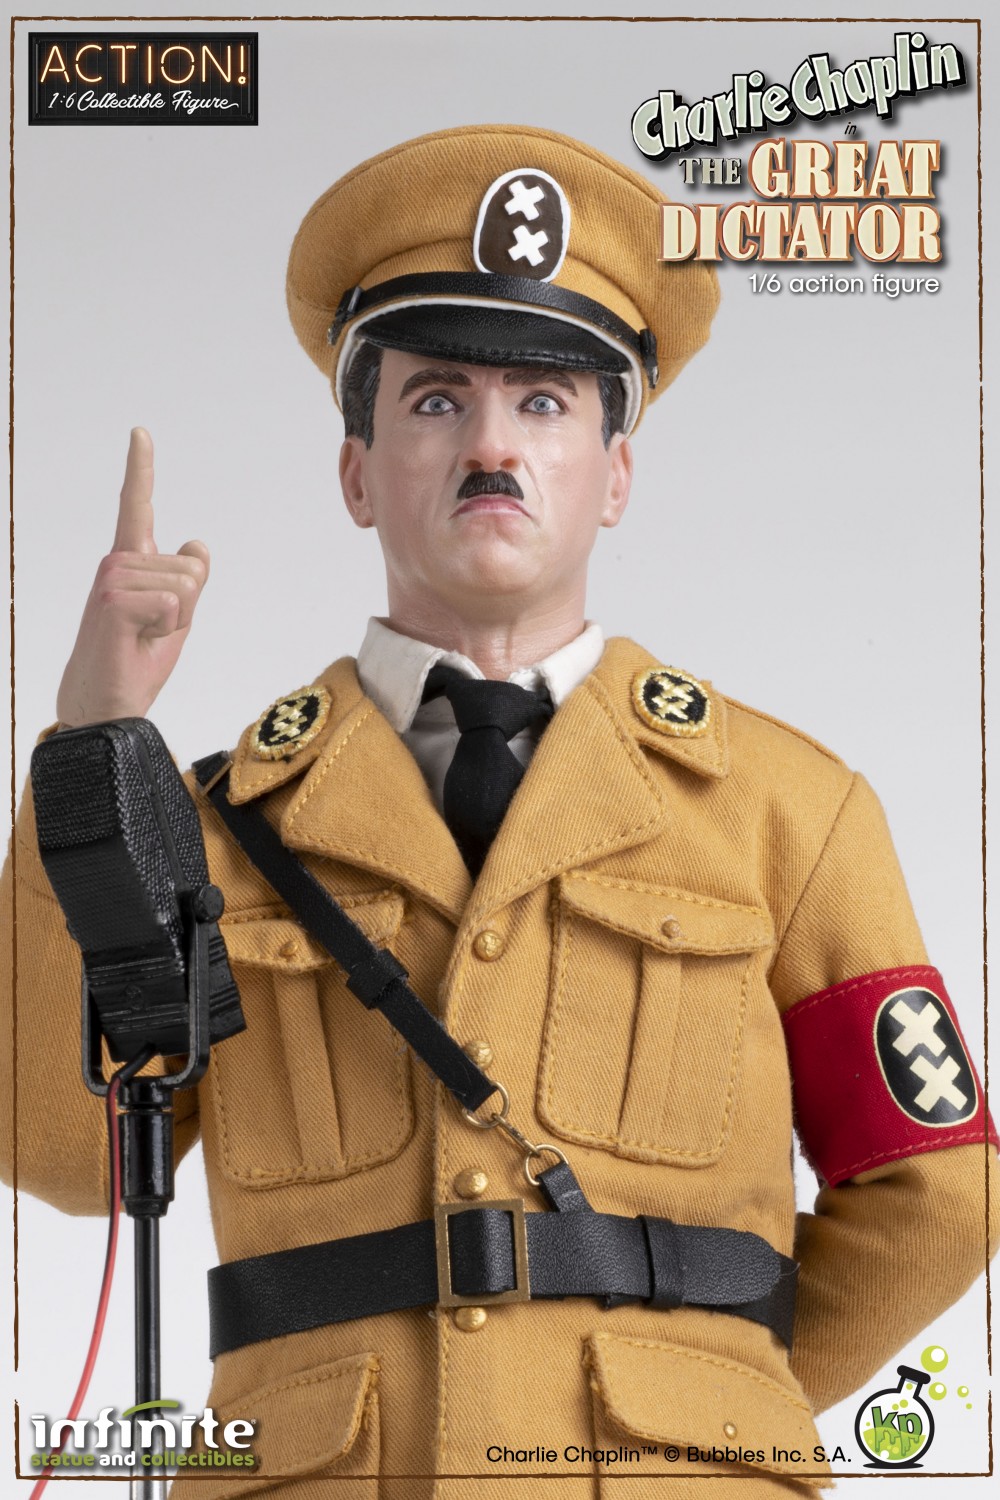 Movie - NEW PRODUCT: Infinite Statue & Kaustic Plastik: CHARLIE CHAPLIN “THE GREAT DICTATOR”  1/6 ACTION FIGURE 5582